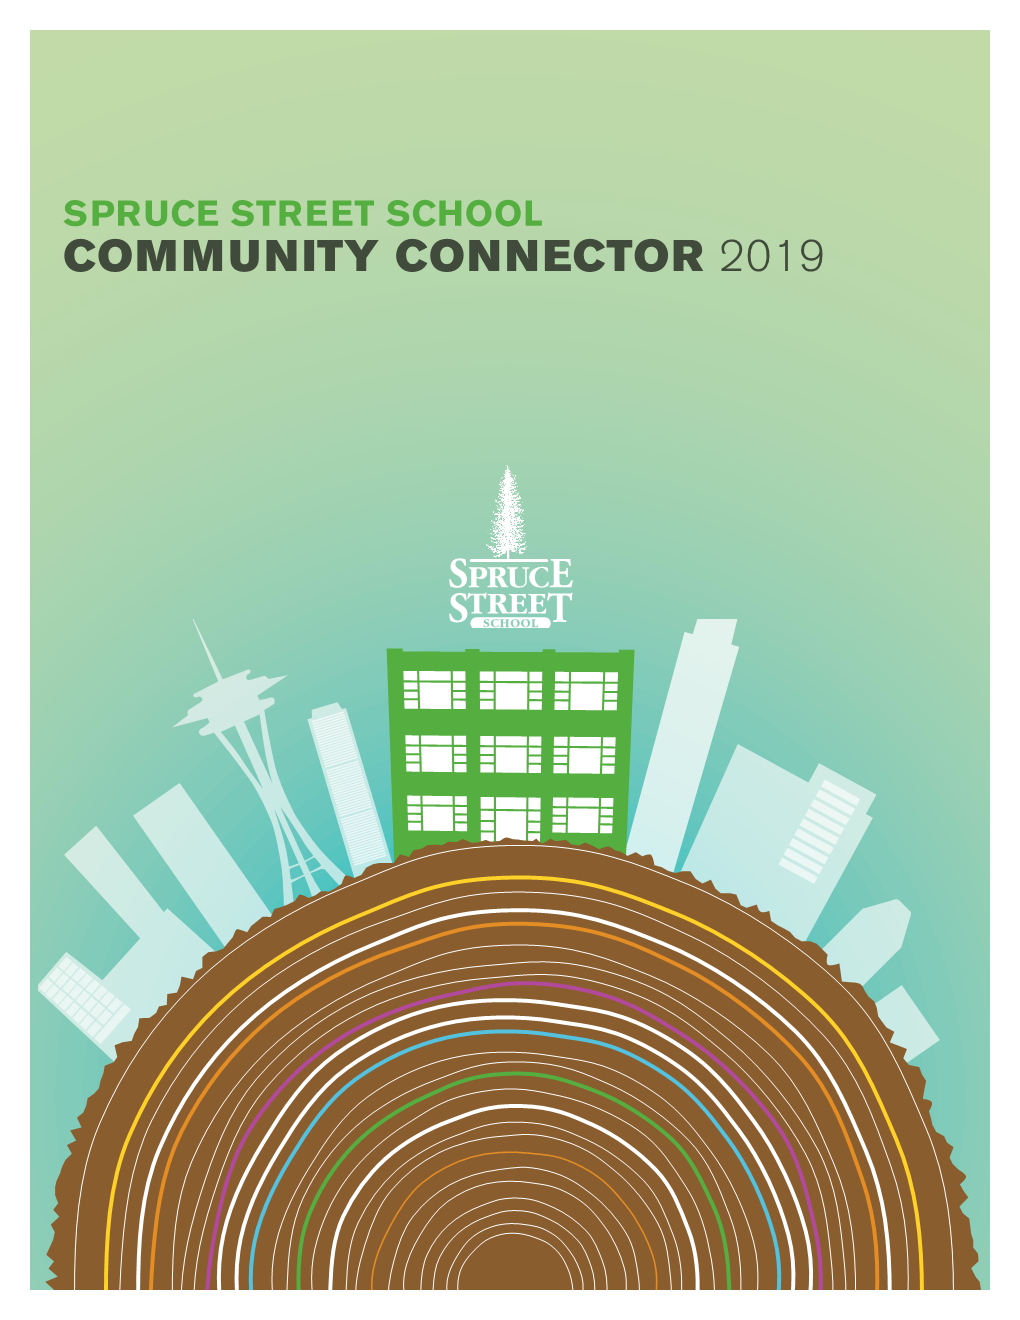 Community Connector 2019